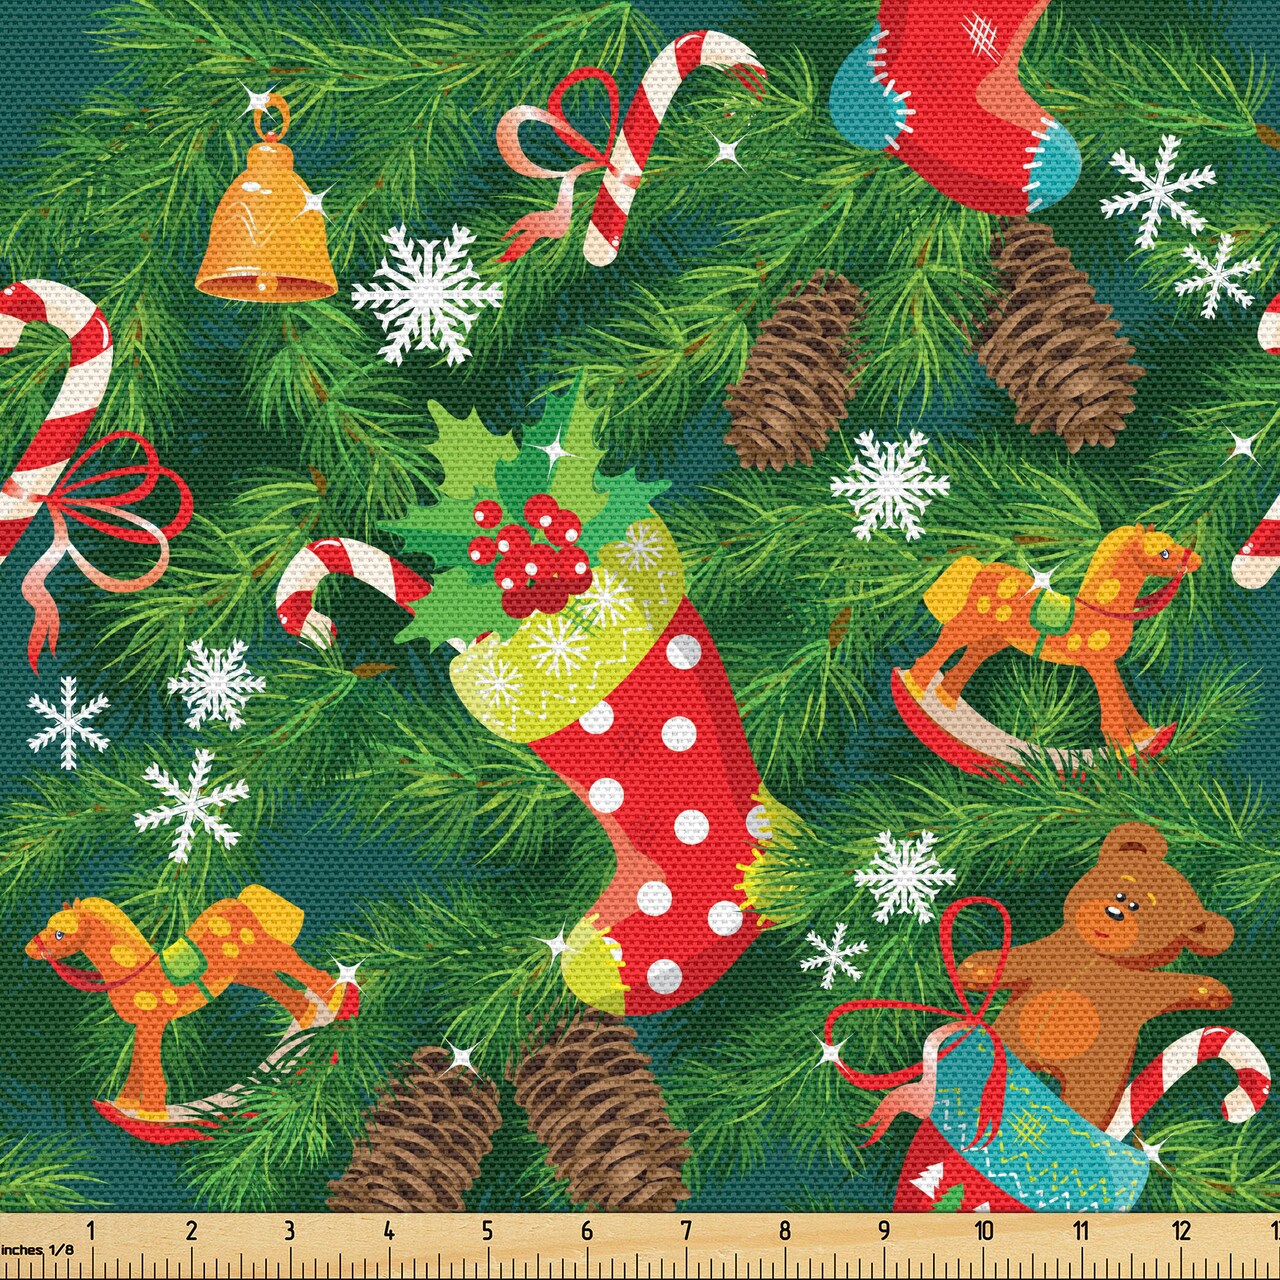 Ambesonne Christmas Fabric by The Yard, Xmas Accessories Stockings Candies Horse Teddy Bear Toys on Pine, Decorative Fabric for Upholstery and Home Accents, 5 Yards, Brown Green